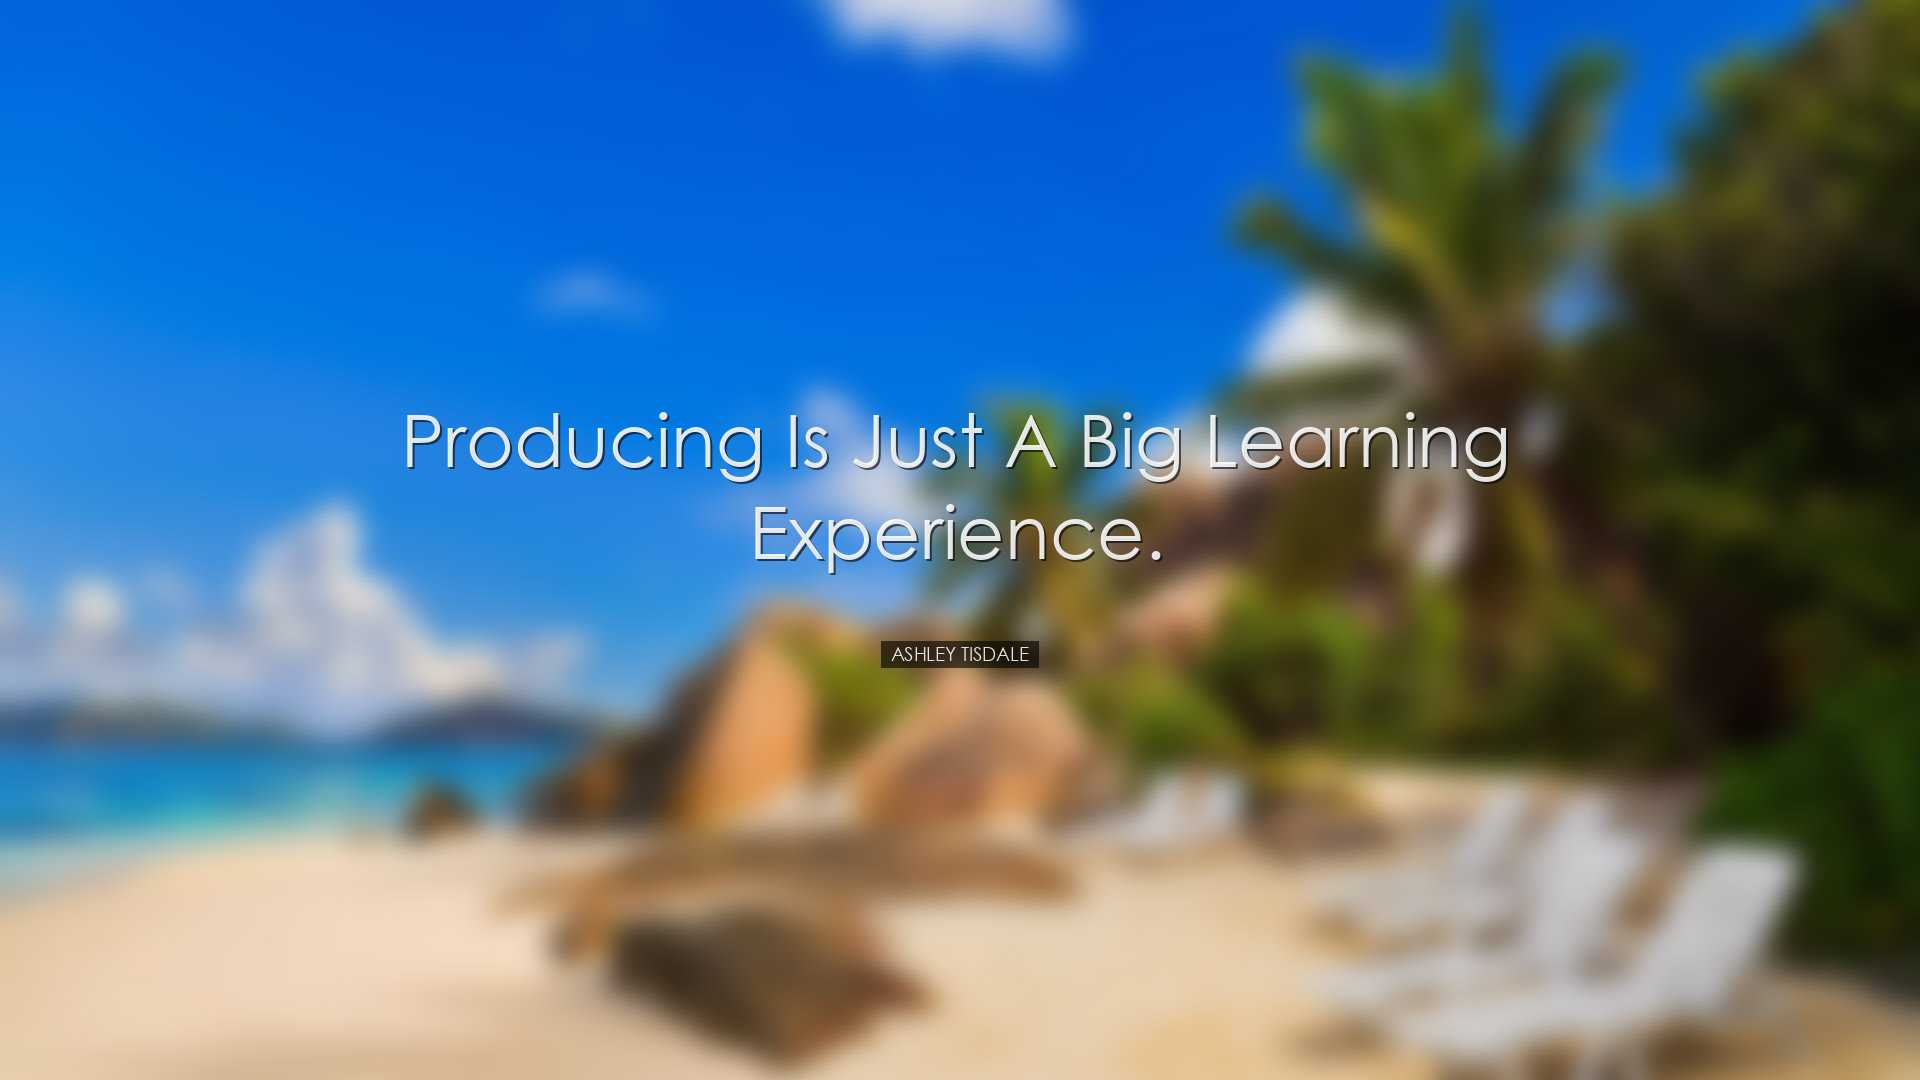 Producing is just a big learning experience. - Ashley Tisdale